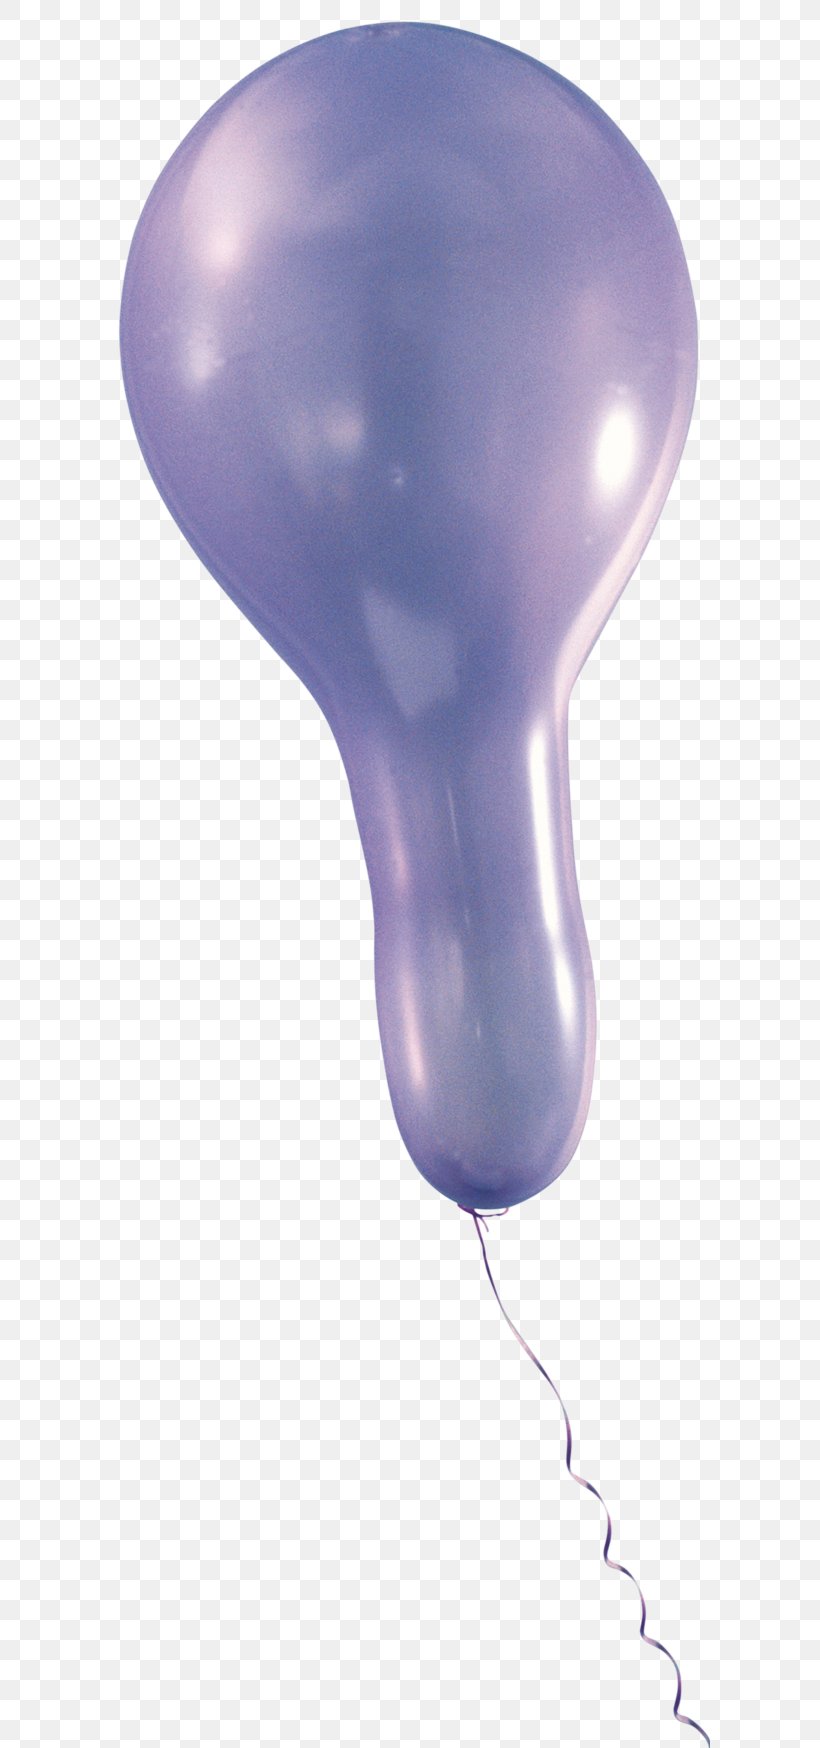 Balloon, PNG, 601x1748px, Balloon, Purple, Violet Download Free